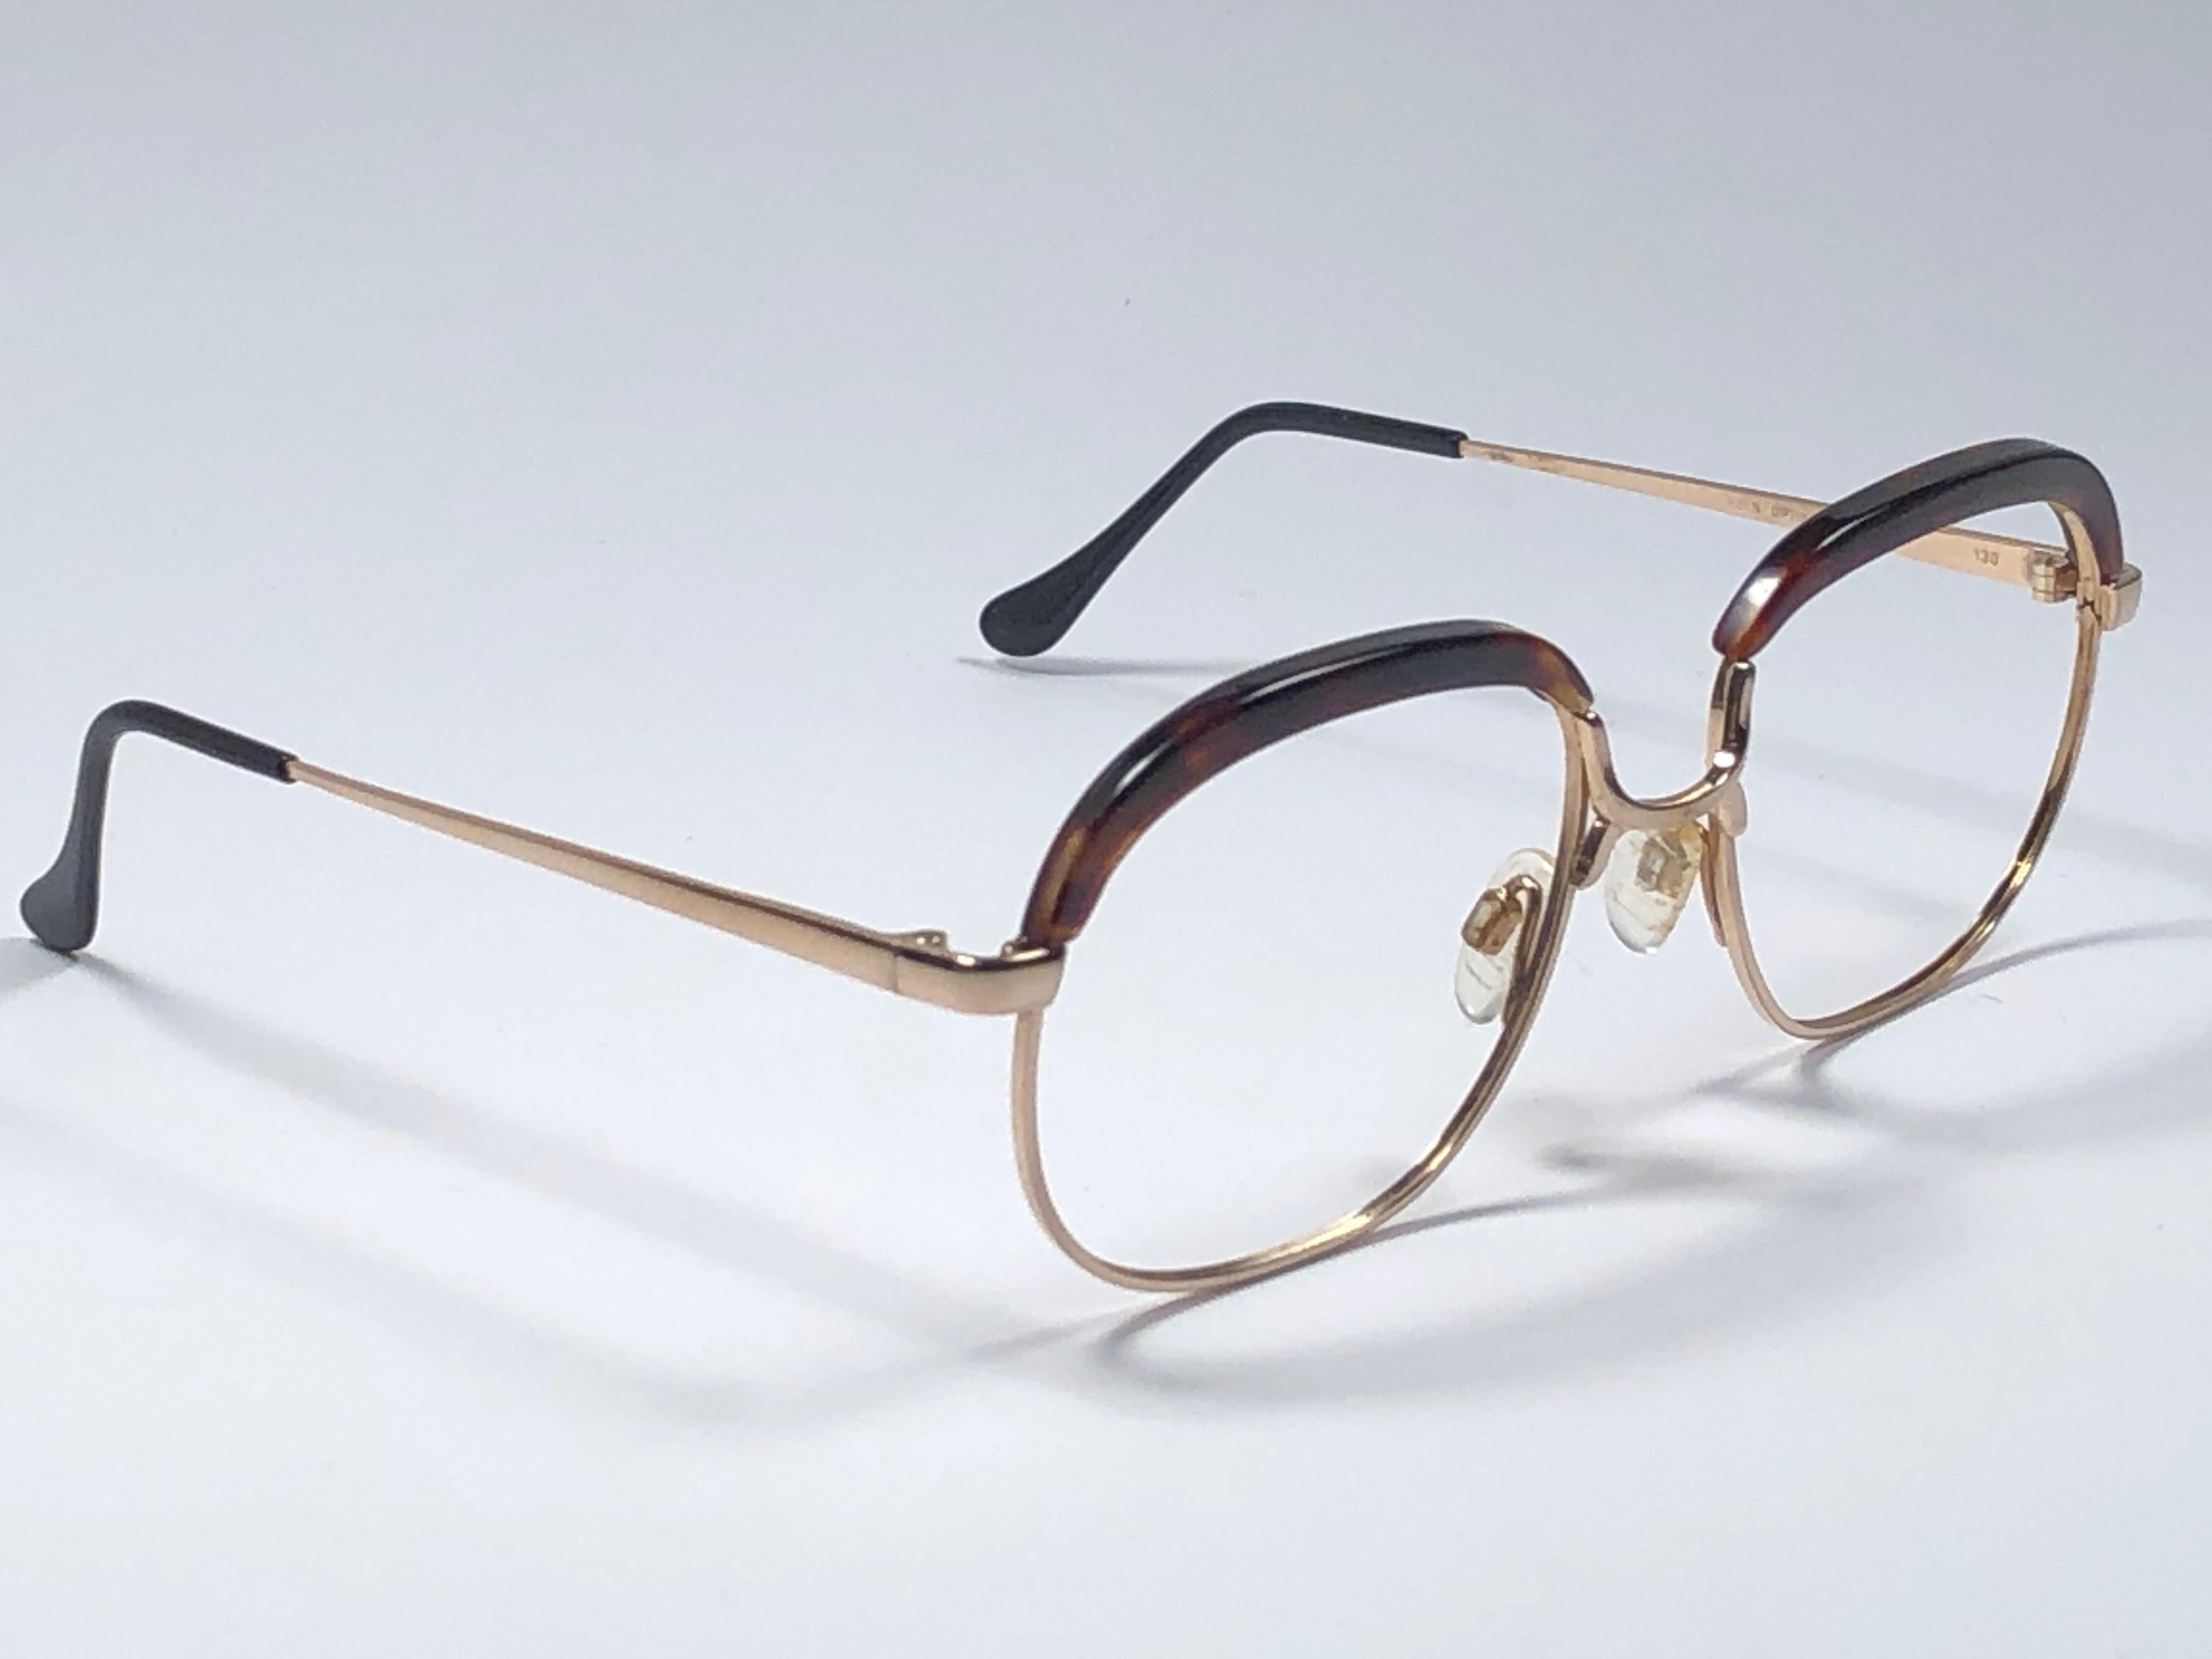 New, rare Köln Optik genuine tortoise shell and gold combination frame. 

Suitable for RX, prescription glasses use. 

Please notice that this item is nearly 40 years old and could show some storage wear. 

New, ever worn or displayed.
Front : 13